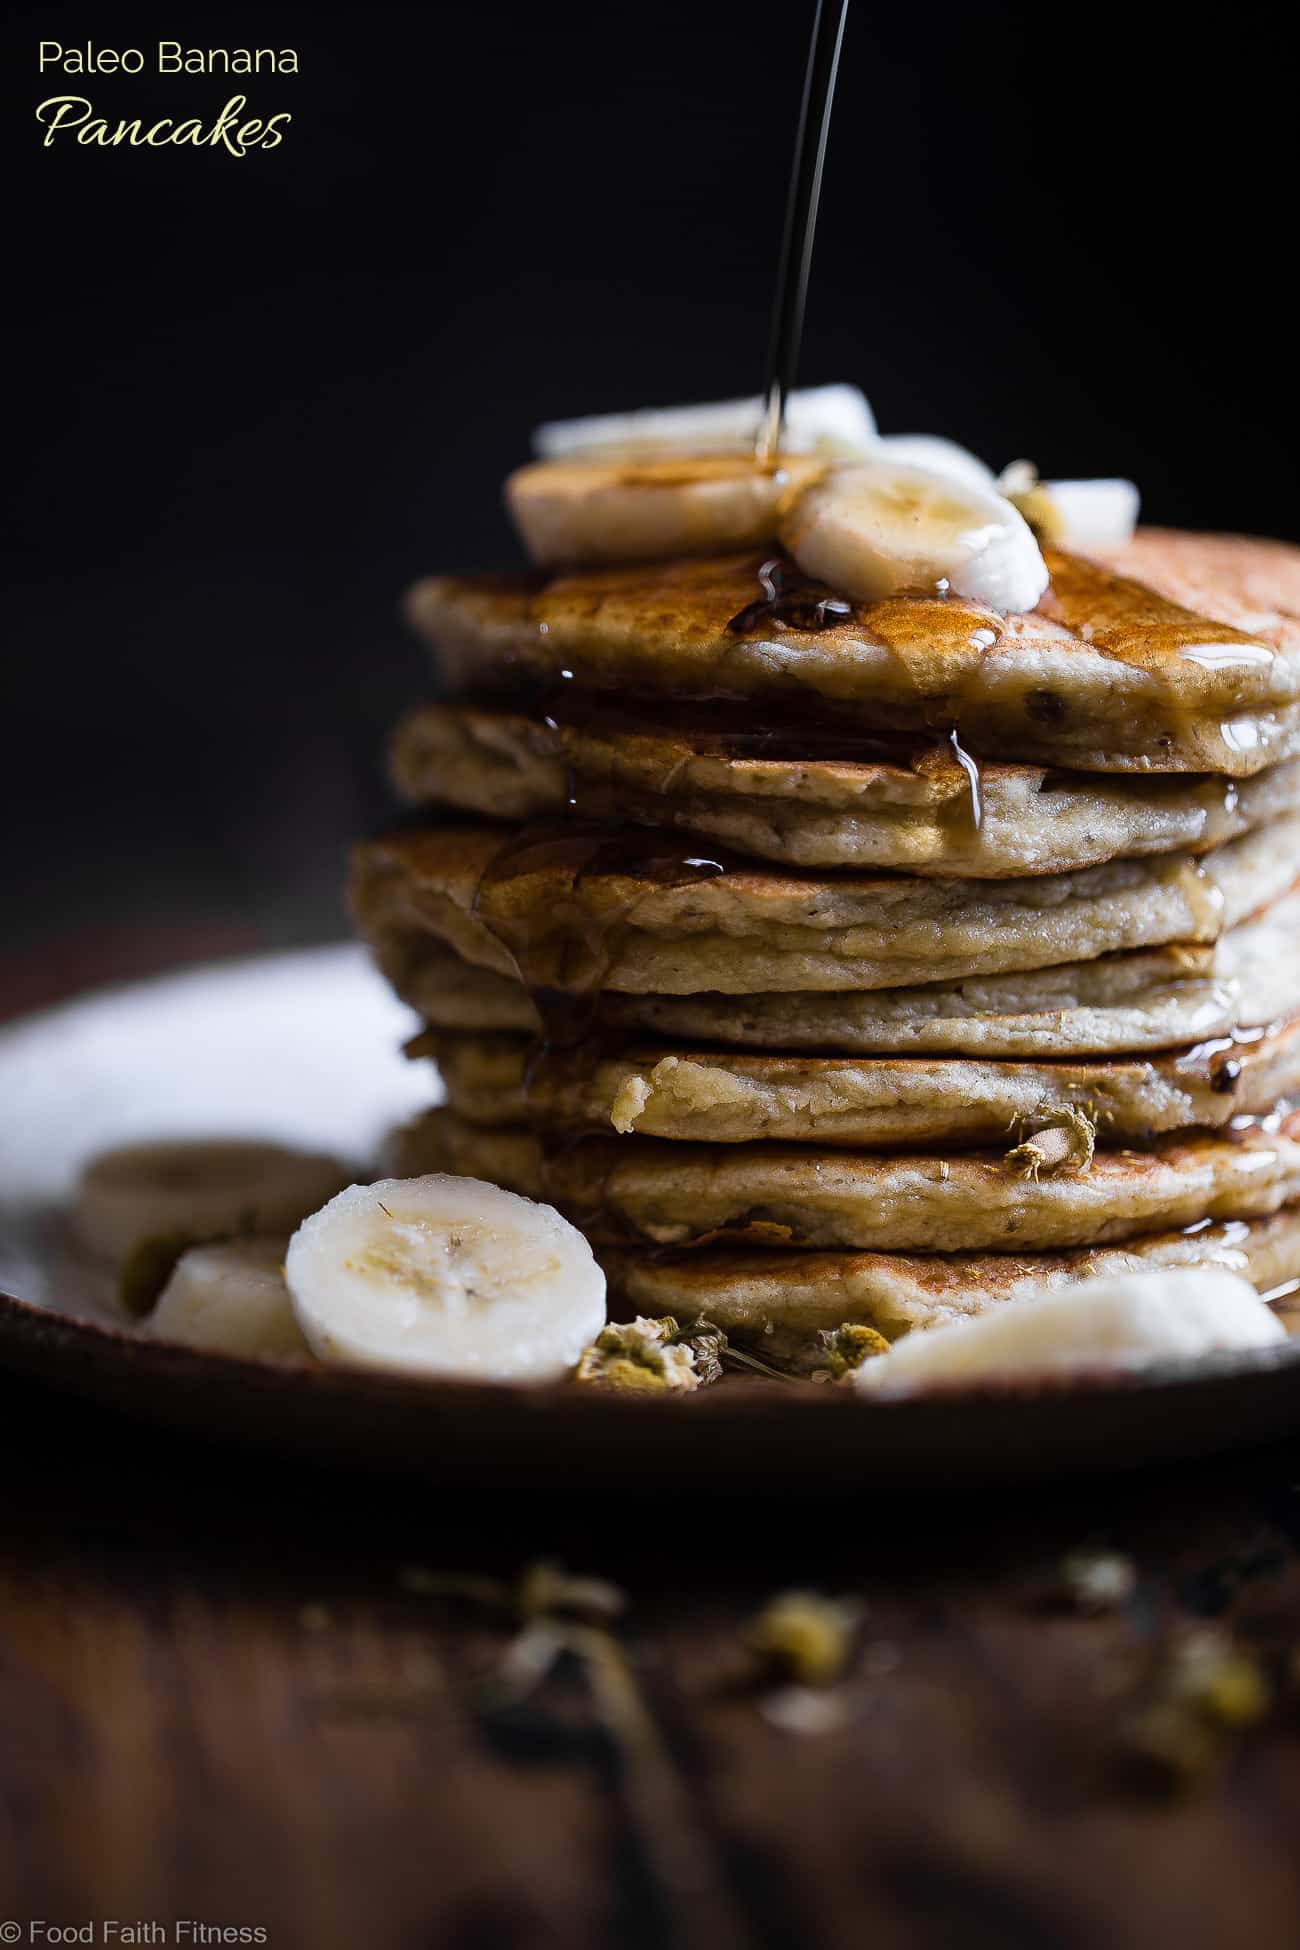 Easy Paleo Banana Pancakes with Coconut Flour - These quick and easy banana pancakes are naturally sweetened, gluten, grain and dairy free and SO light and fluffy! The perfect healthy start to your day or weekend breakfast! | Foodfaithfitness.com | #Foodfaithfitness | #Paleo #Glutenfree #Pancakes #Grainfree